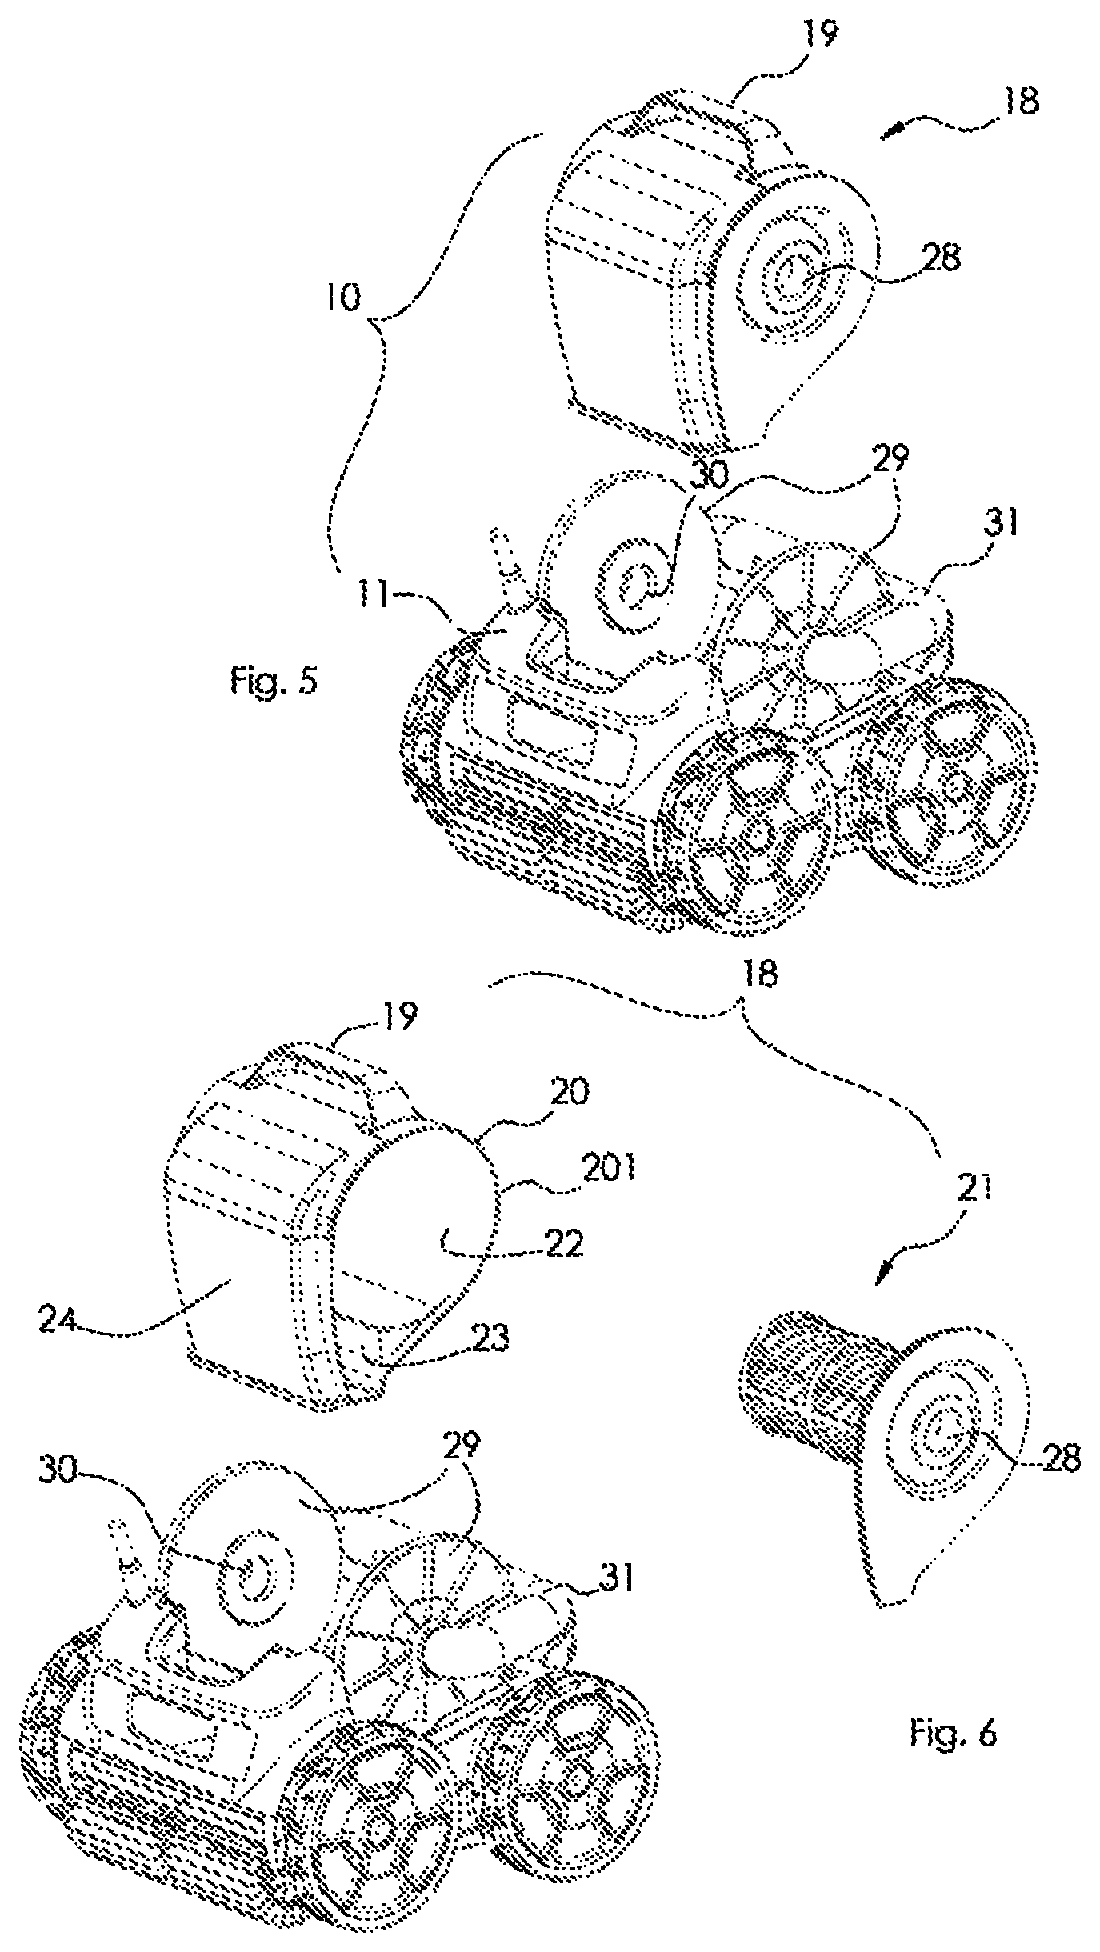 Swimming pool cleaning apparatus having a debris separation device operating by centrifugal spinning and filtration